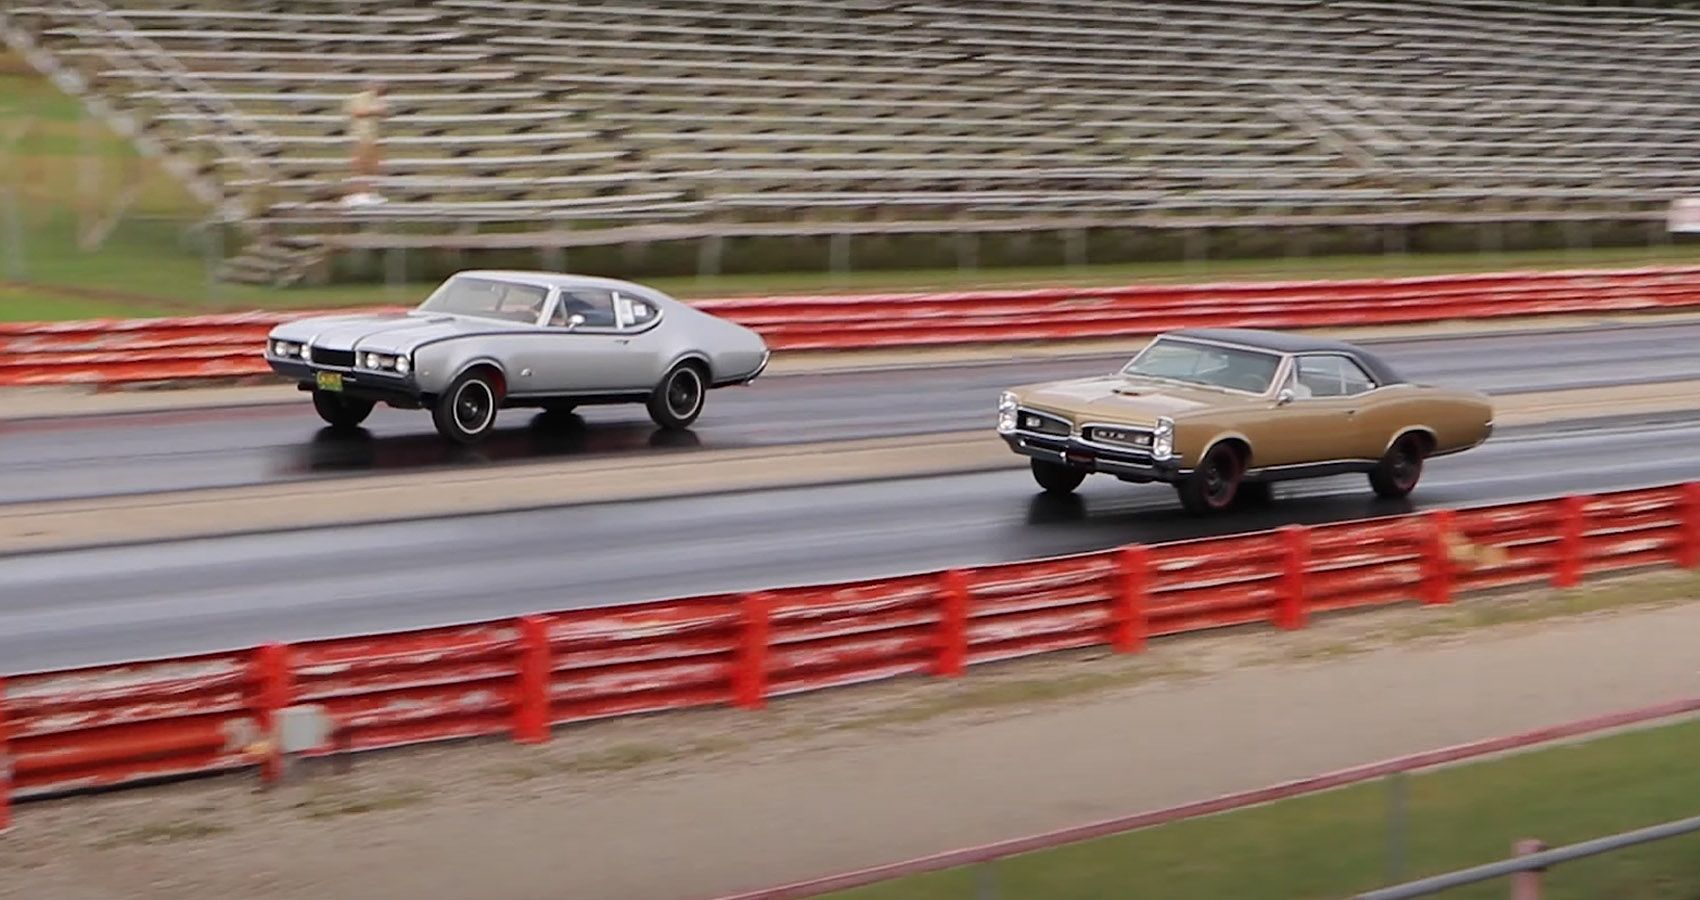 Pure Stock Muscle Car Drag Race Between A 1967 Pontiac GTO And A 1968 Hurst Olds